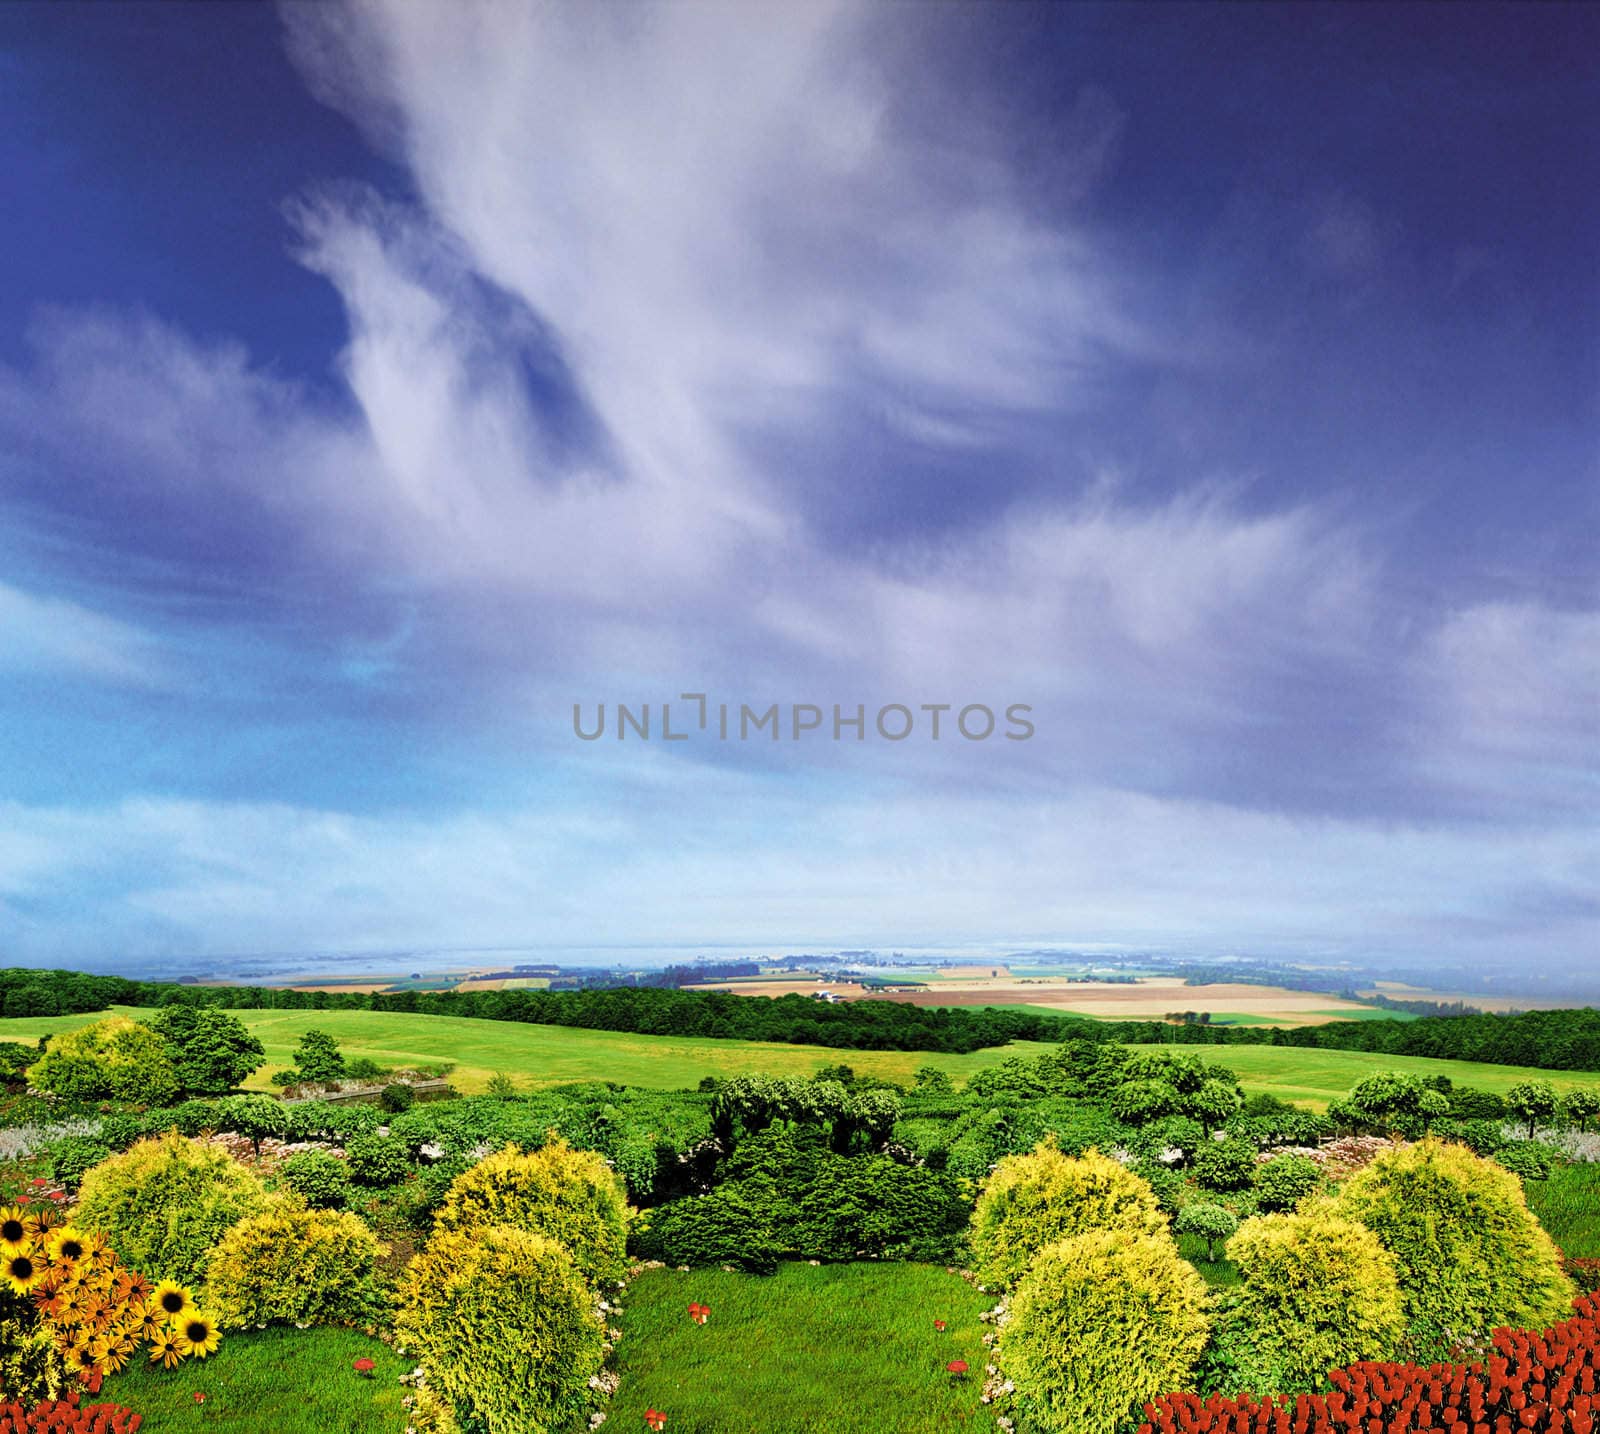 Illustrative garden and countryside view with blue sky, grass and flowers